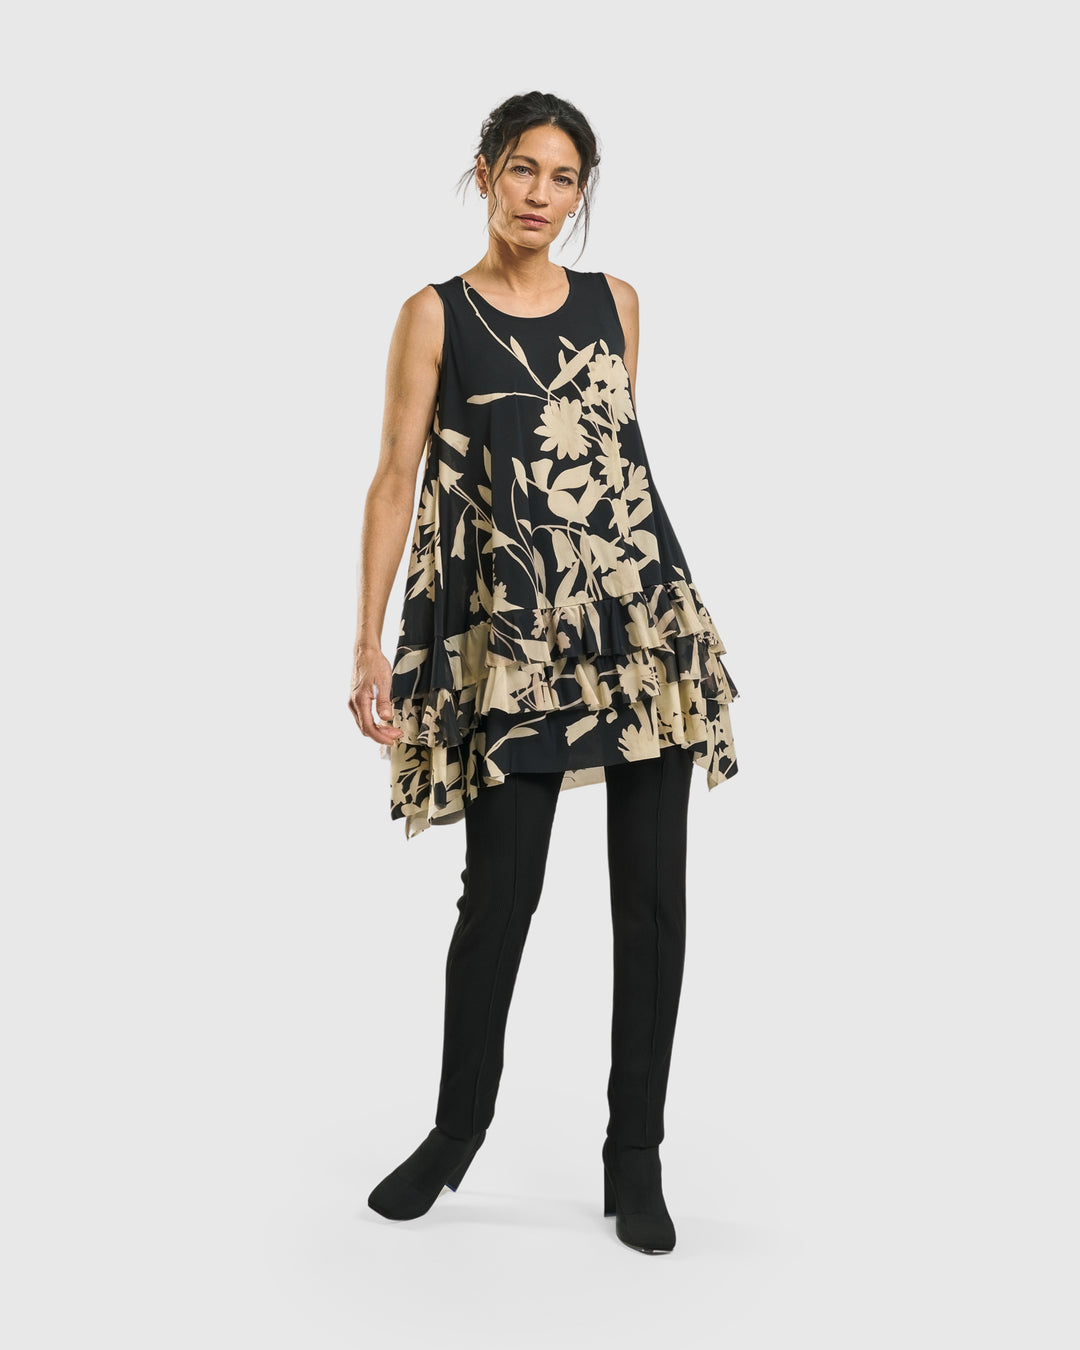 Goldfinch Sleeveless Top, Floral